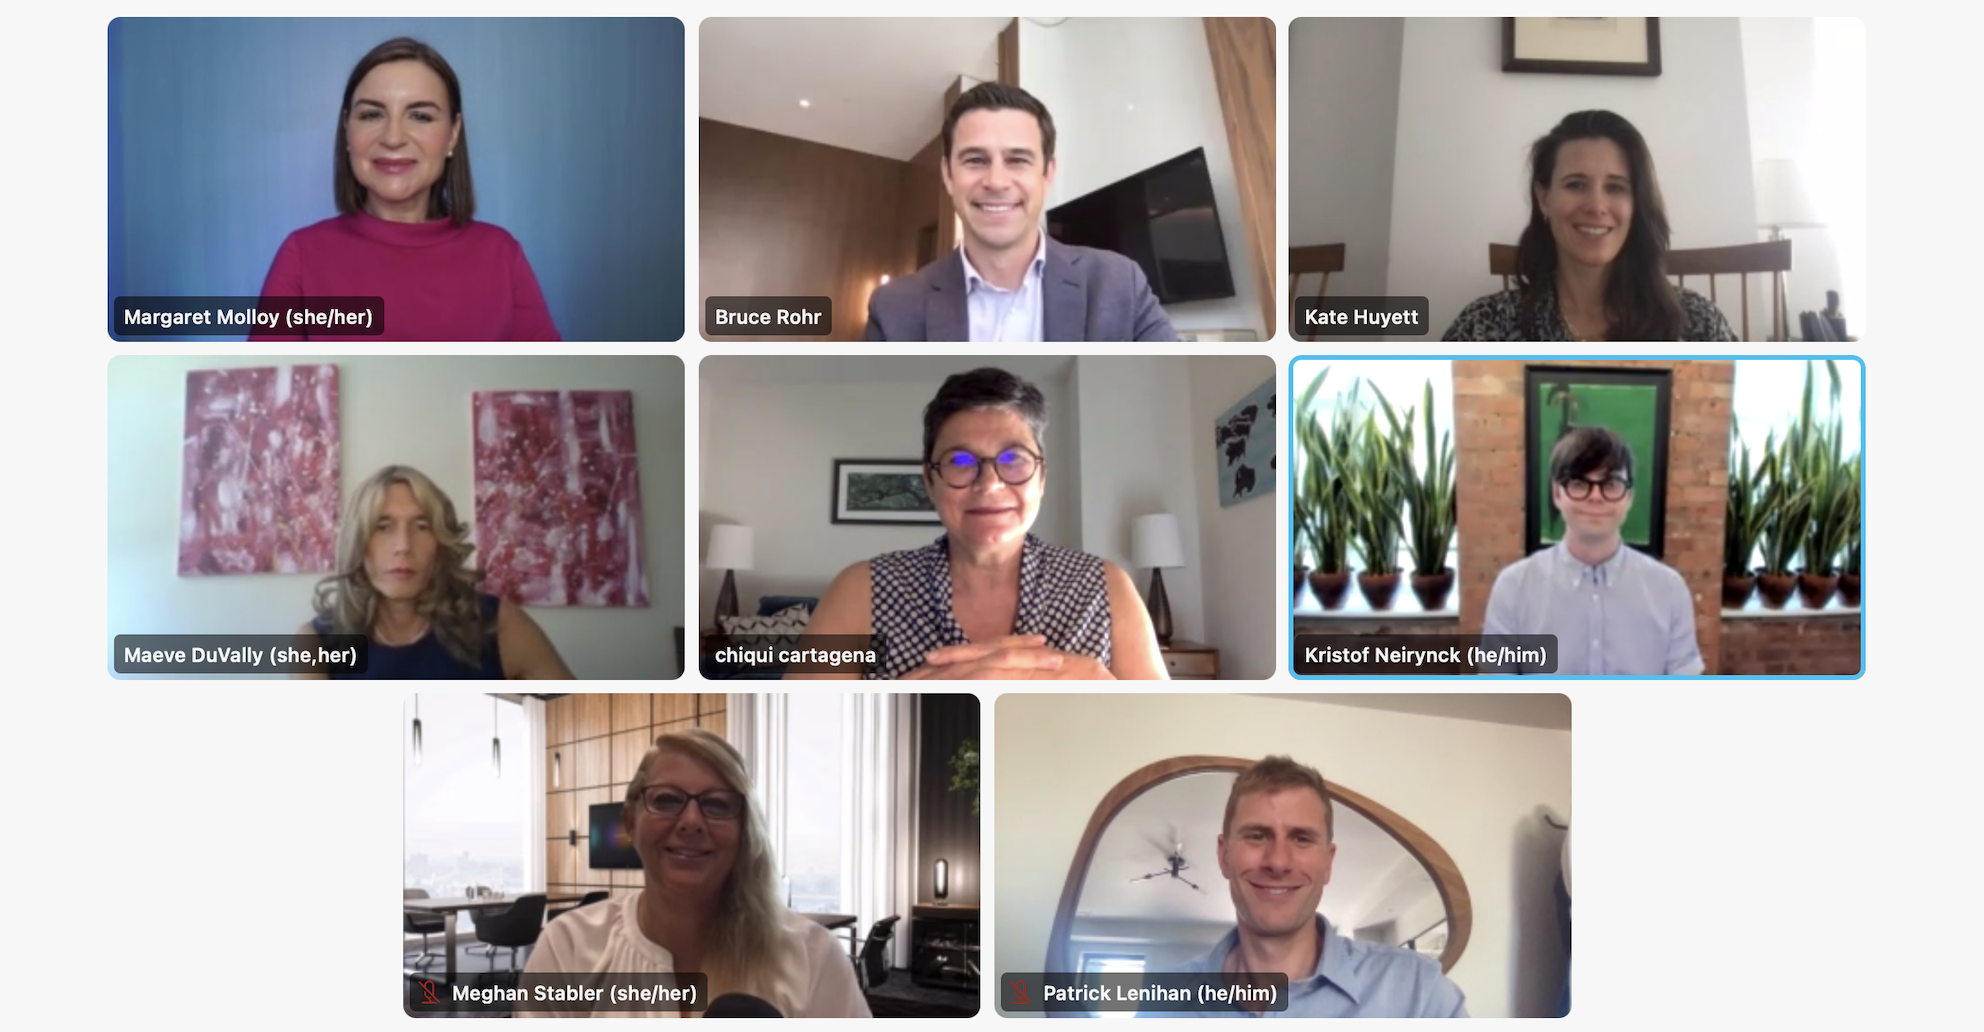 Siegel + Gale's Global CMO, Margaret Molloy, on a video call with 7 marketing executives in celebration of pride month